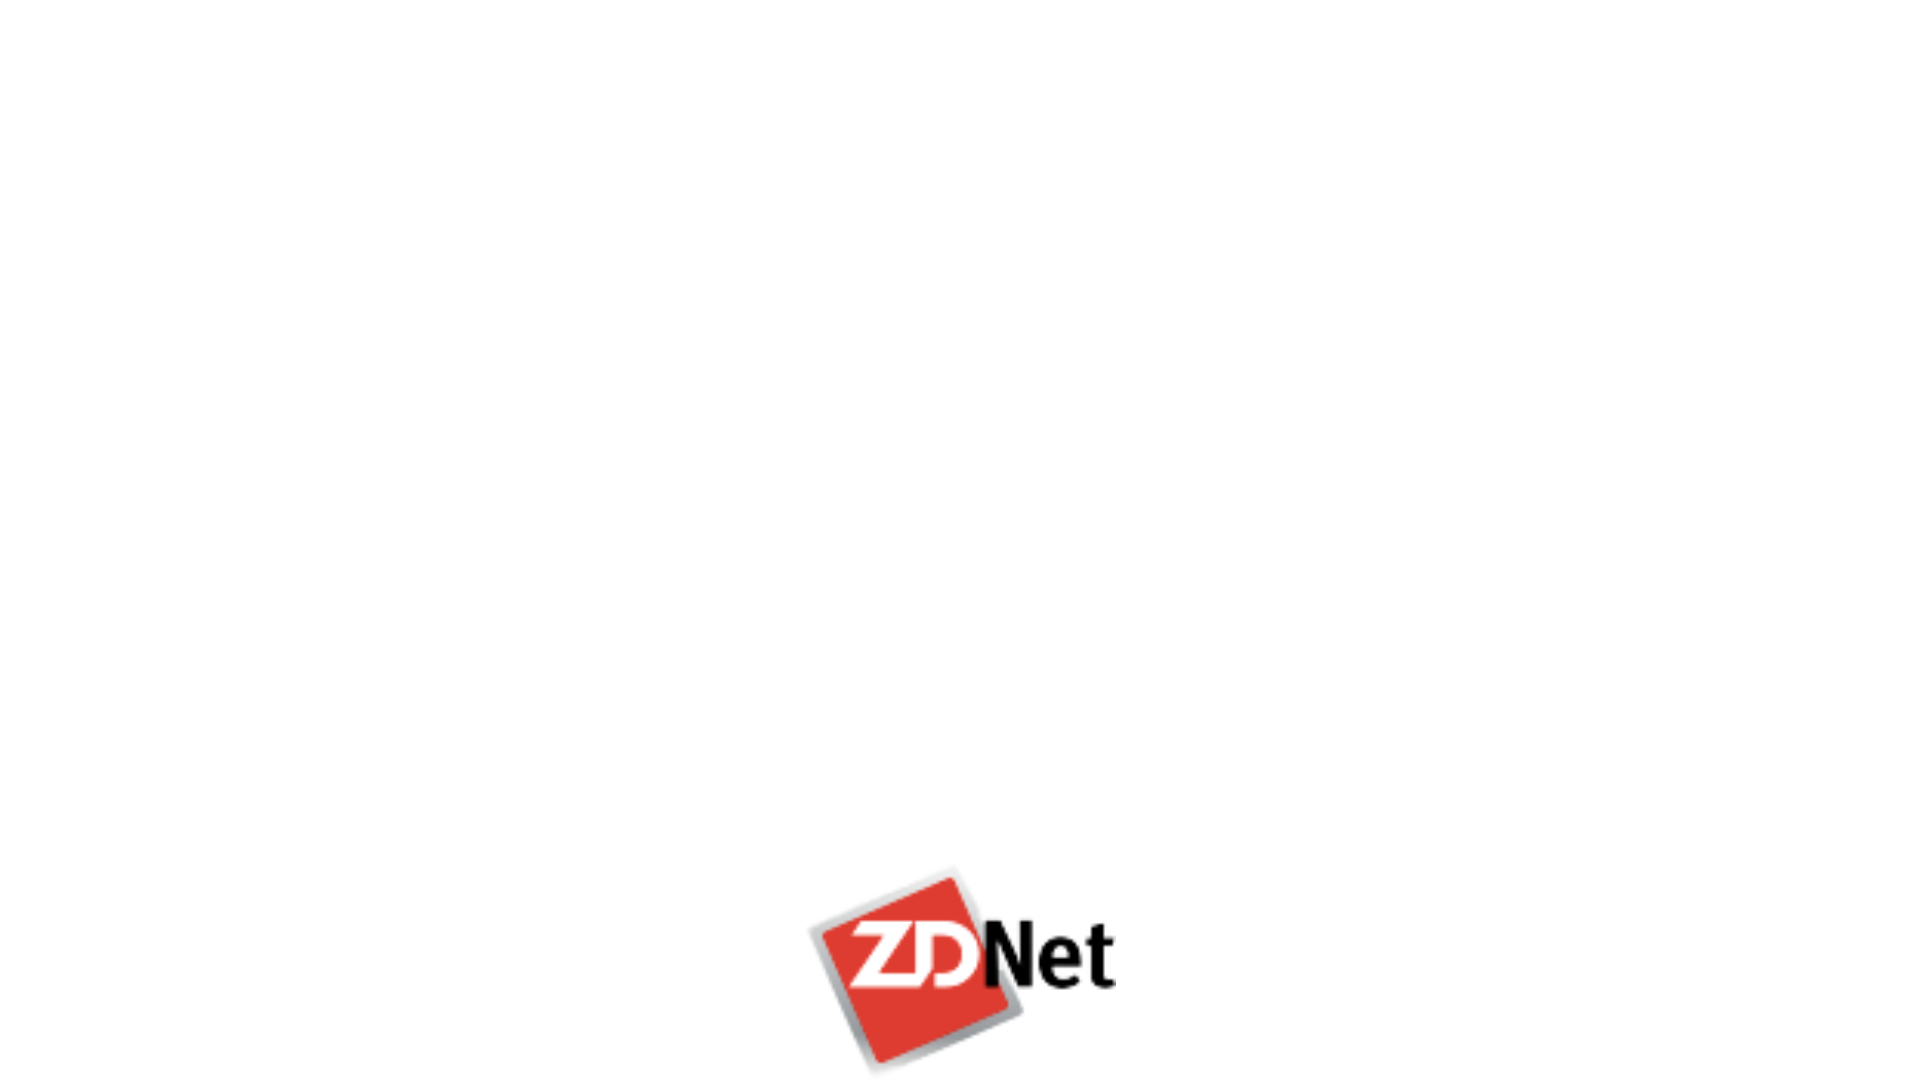 The zd net logo is on a white background.